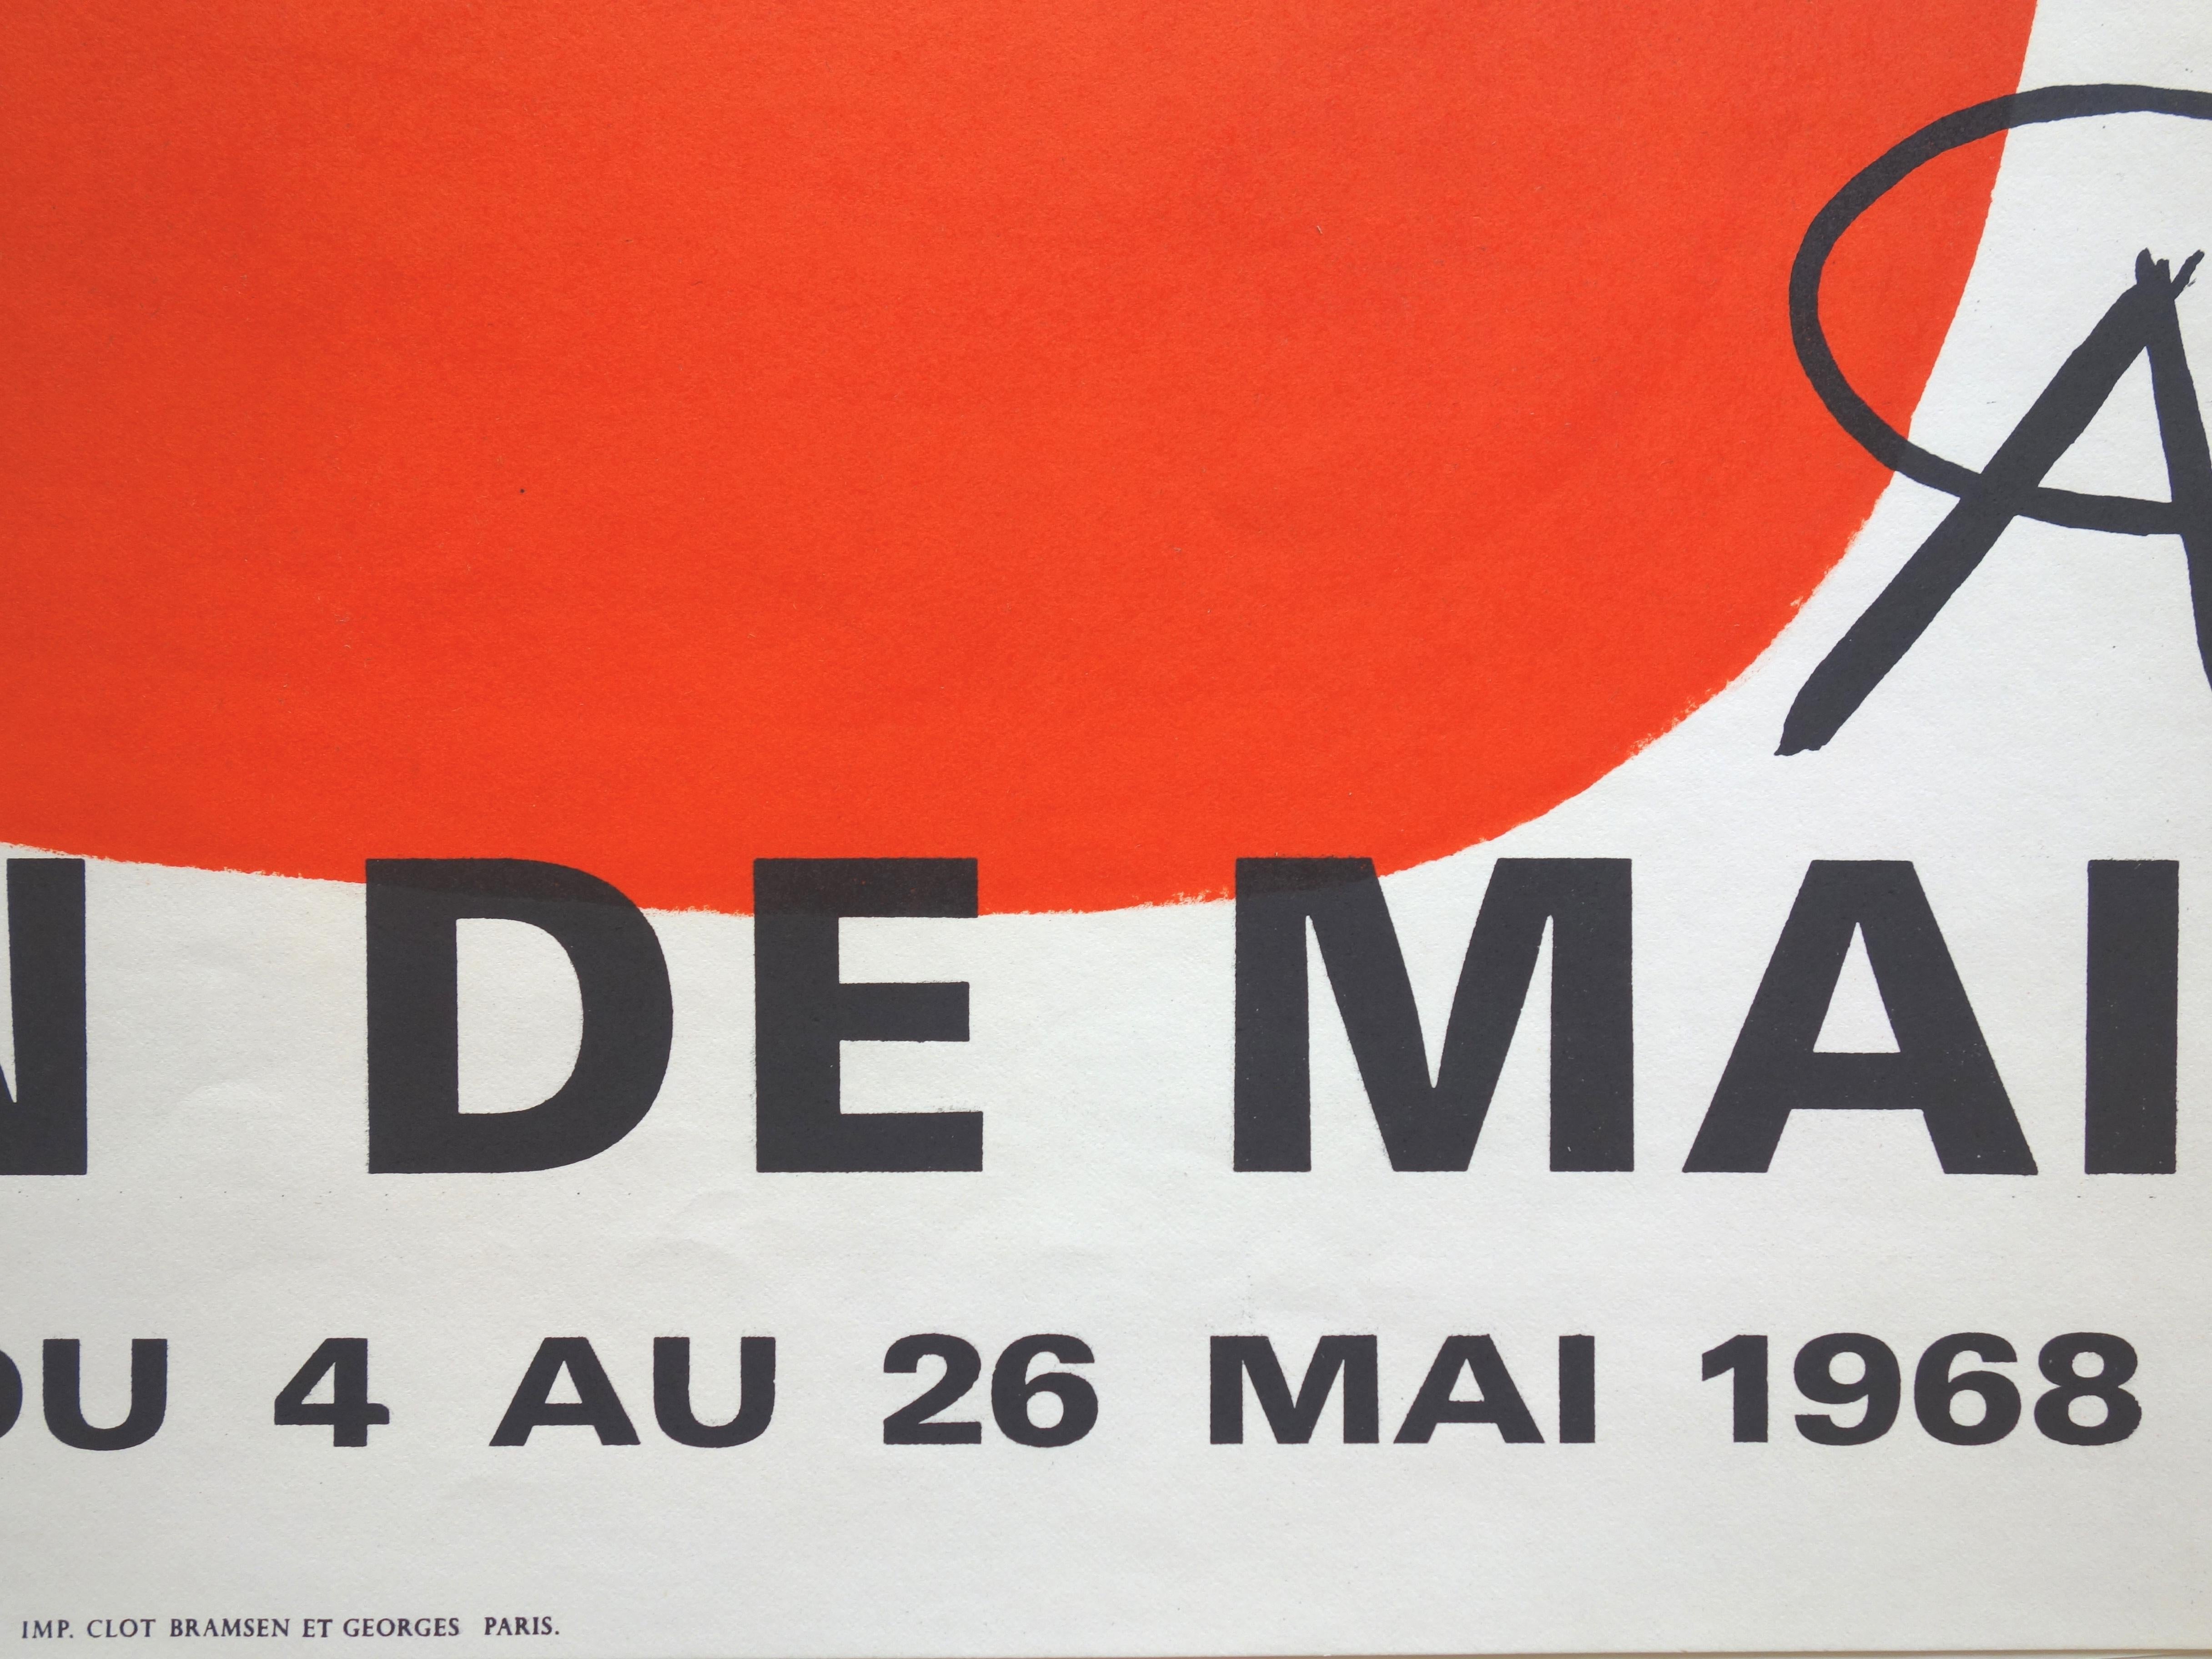 After Alexander Calder
Colorful Abstract Elements, 1968

Poster
Printed signature in the plate
Made for the exhibition of Alexander Calder at Modern art Museum of Paris, in 1968
65 x 48 cm (c. 25.5 x 18.8 in)

Excellent condition